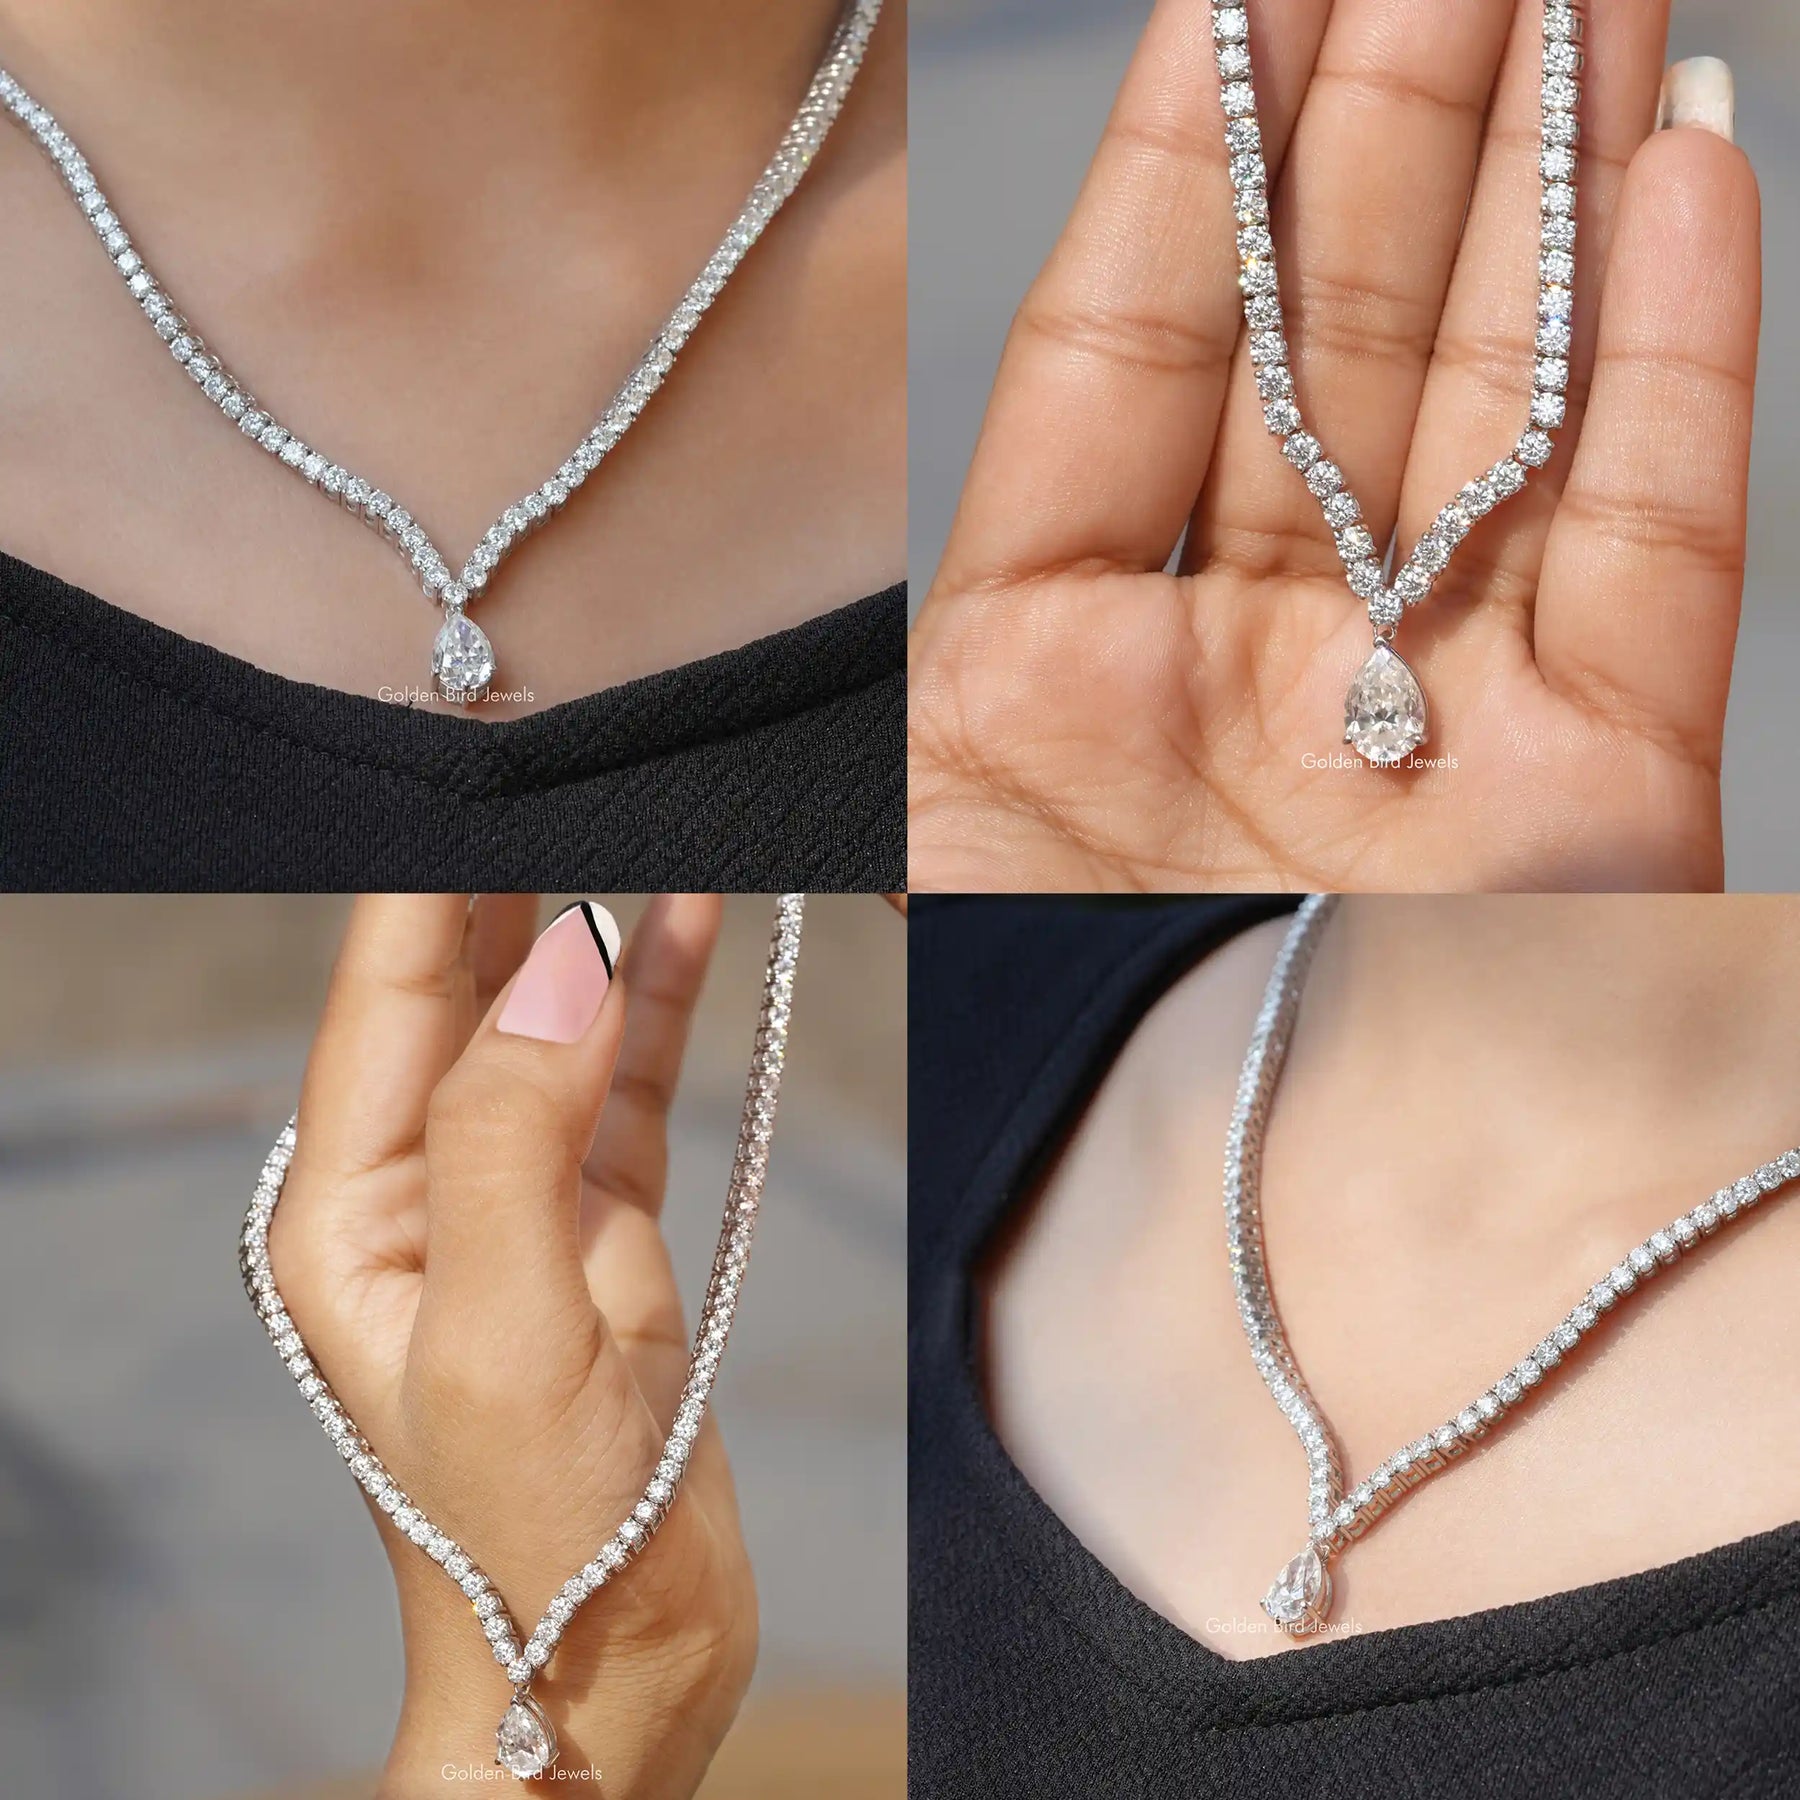 [Collage of pear shaped tennis wedding necklace]-[Golden Bird Jewels]